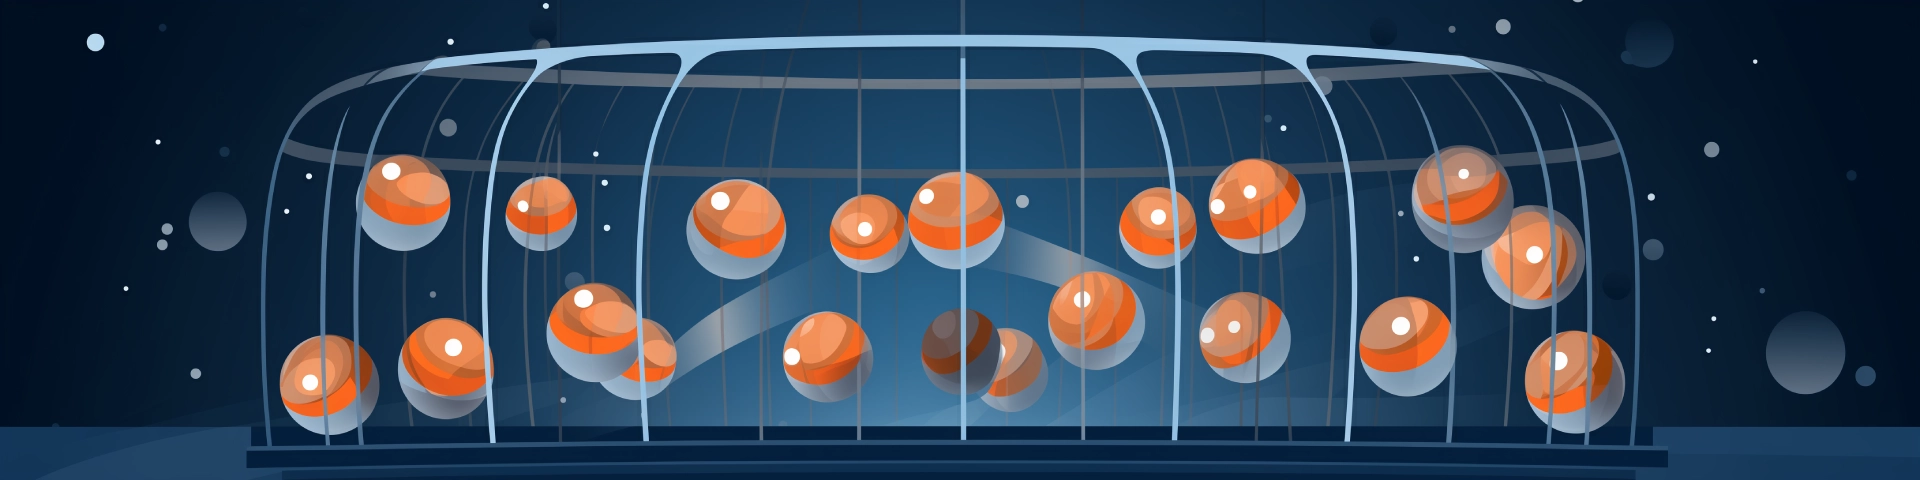 Balls flying around in a bingo cage